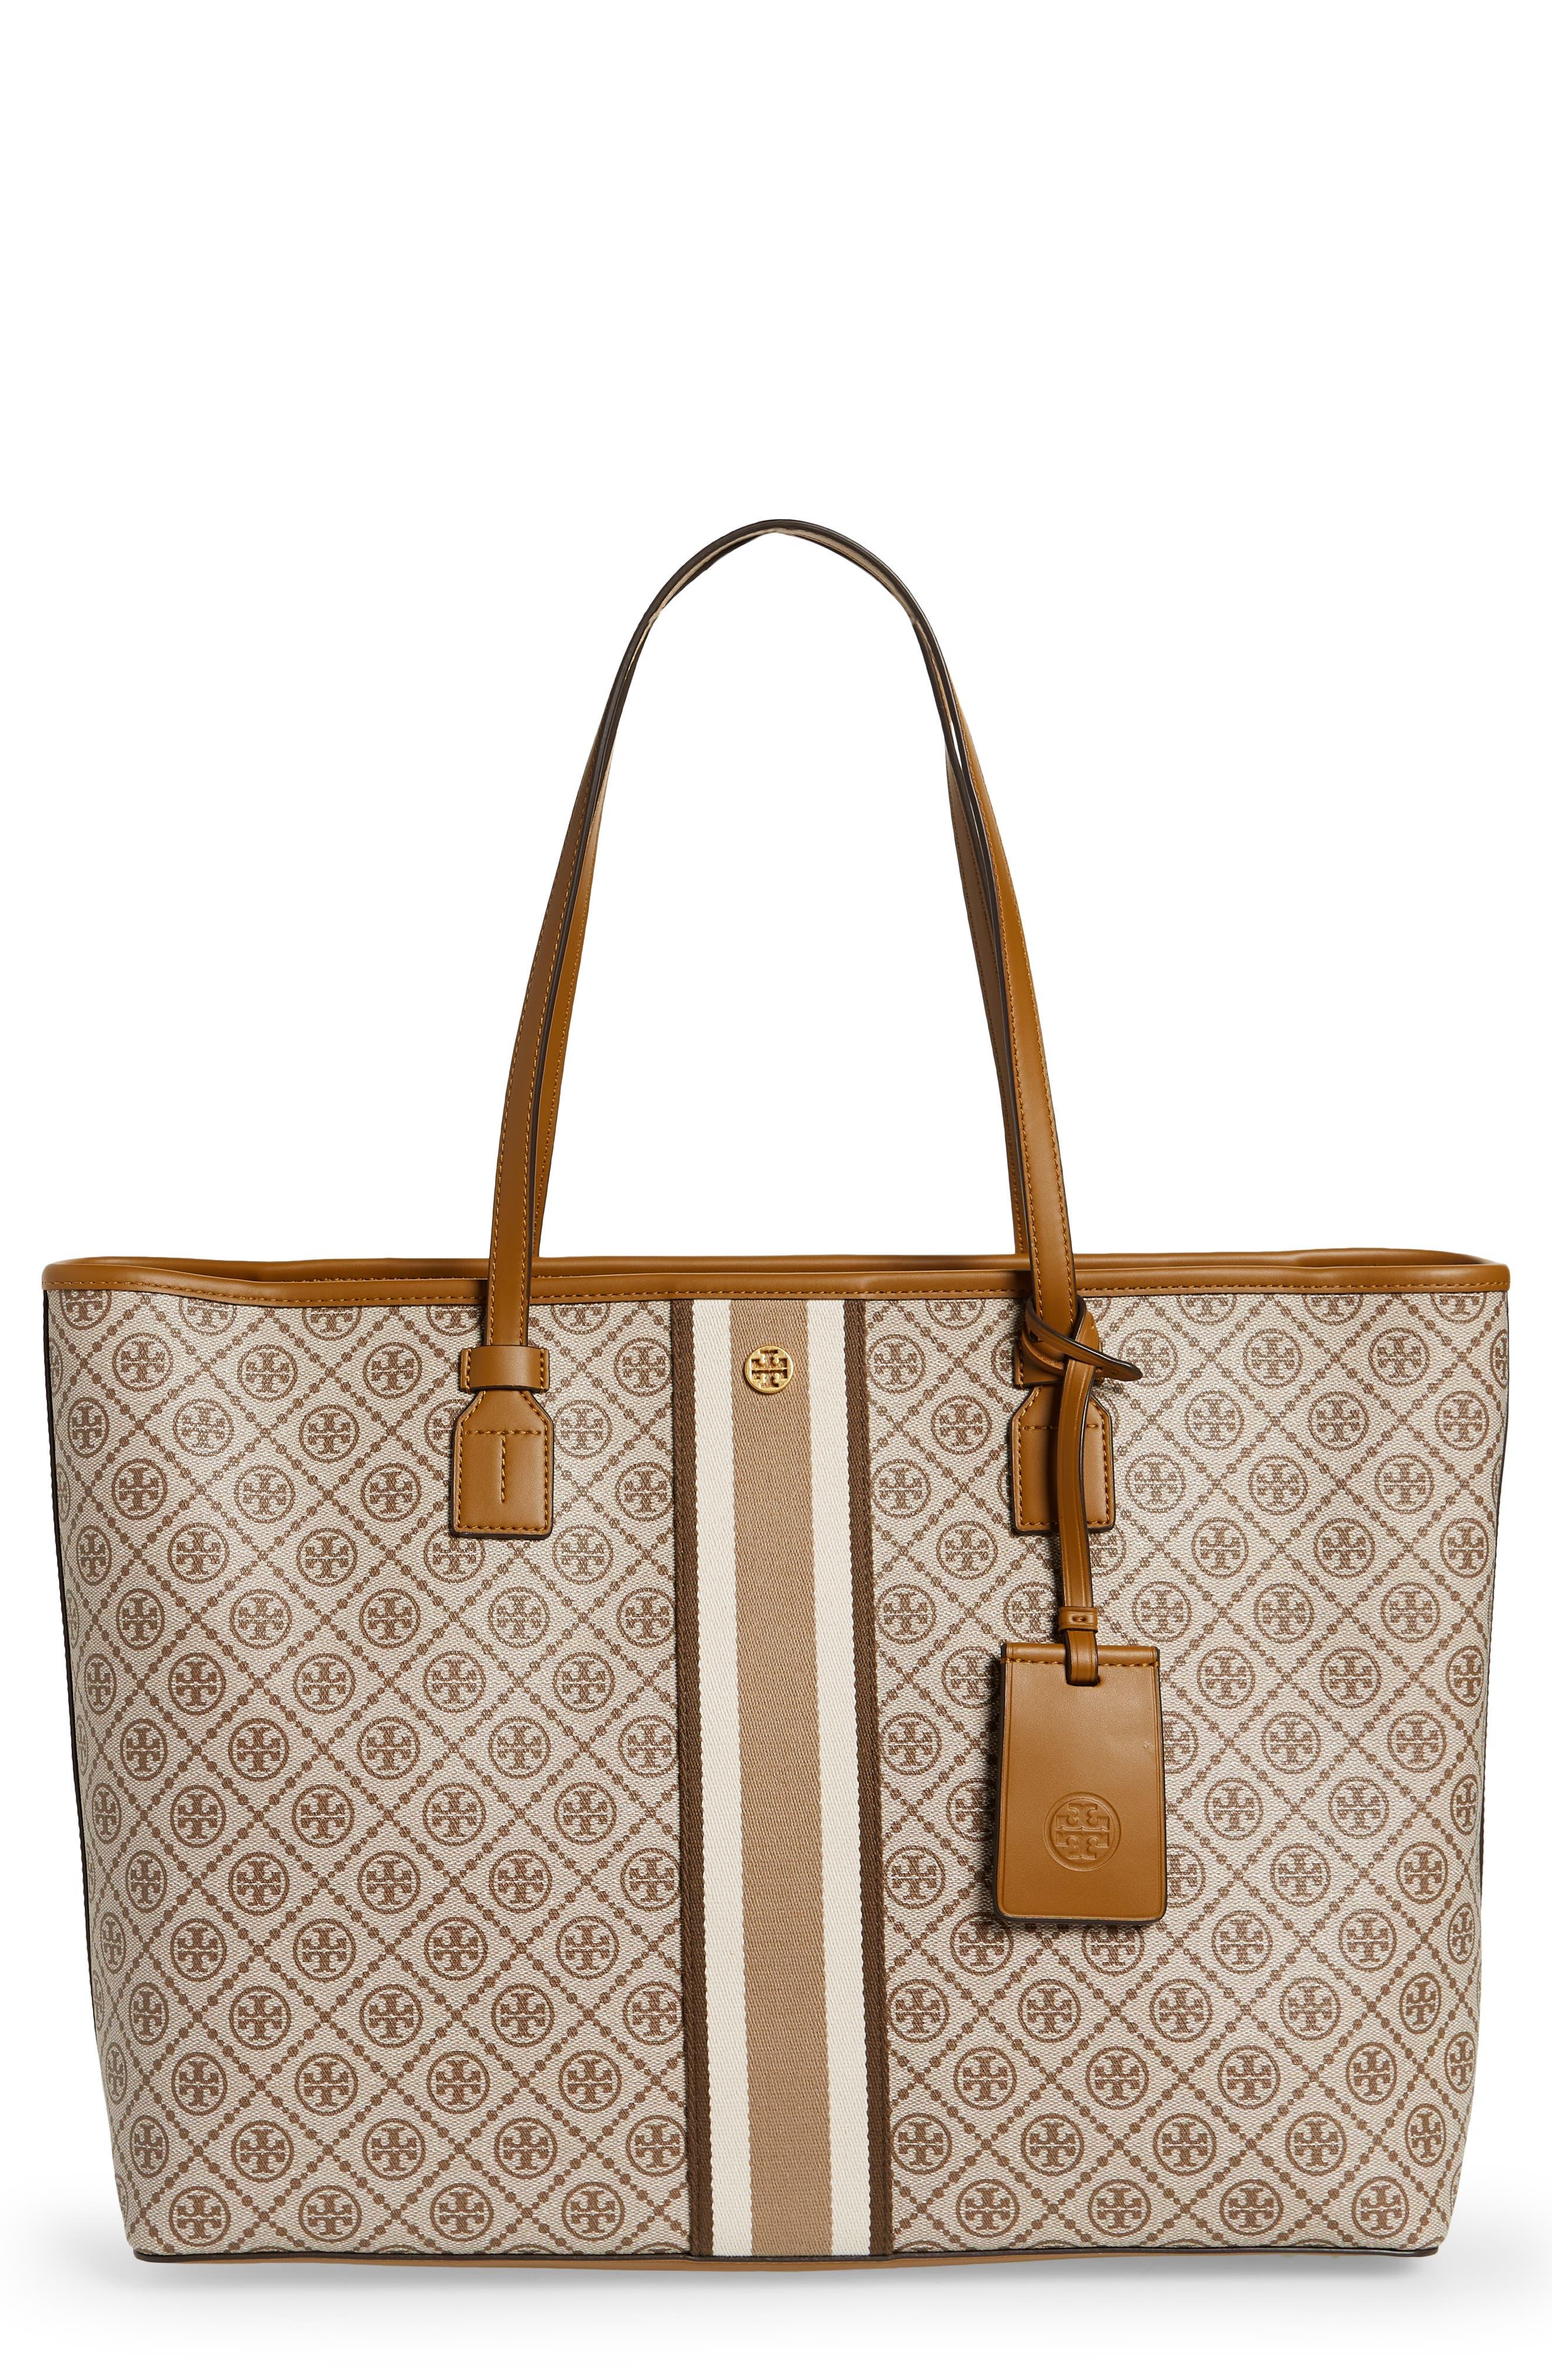 Tory Burch T Monogram Coated Canvas Tote in Brown | Lyst